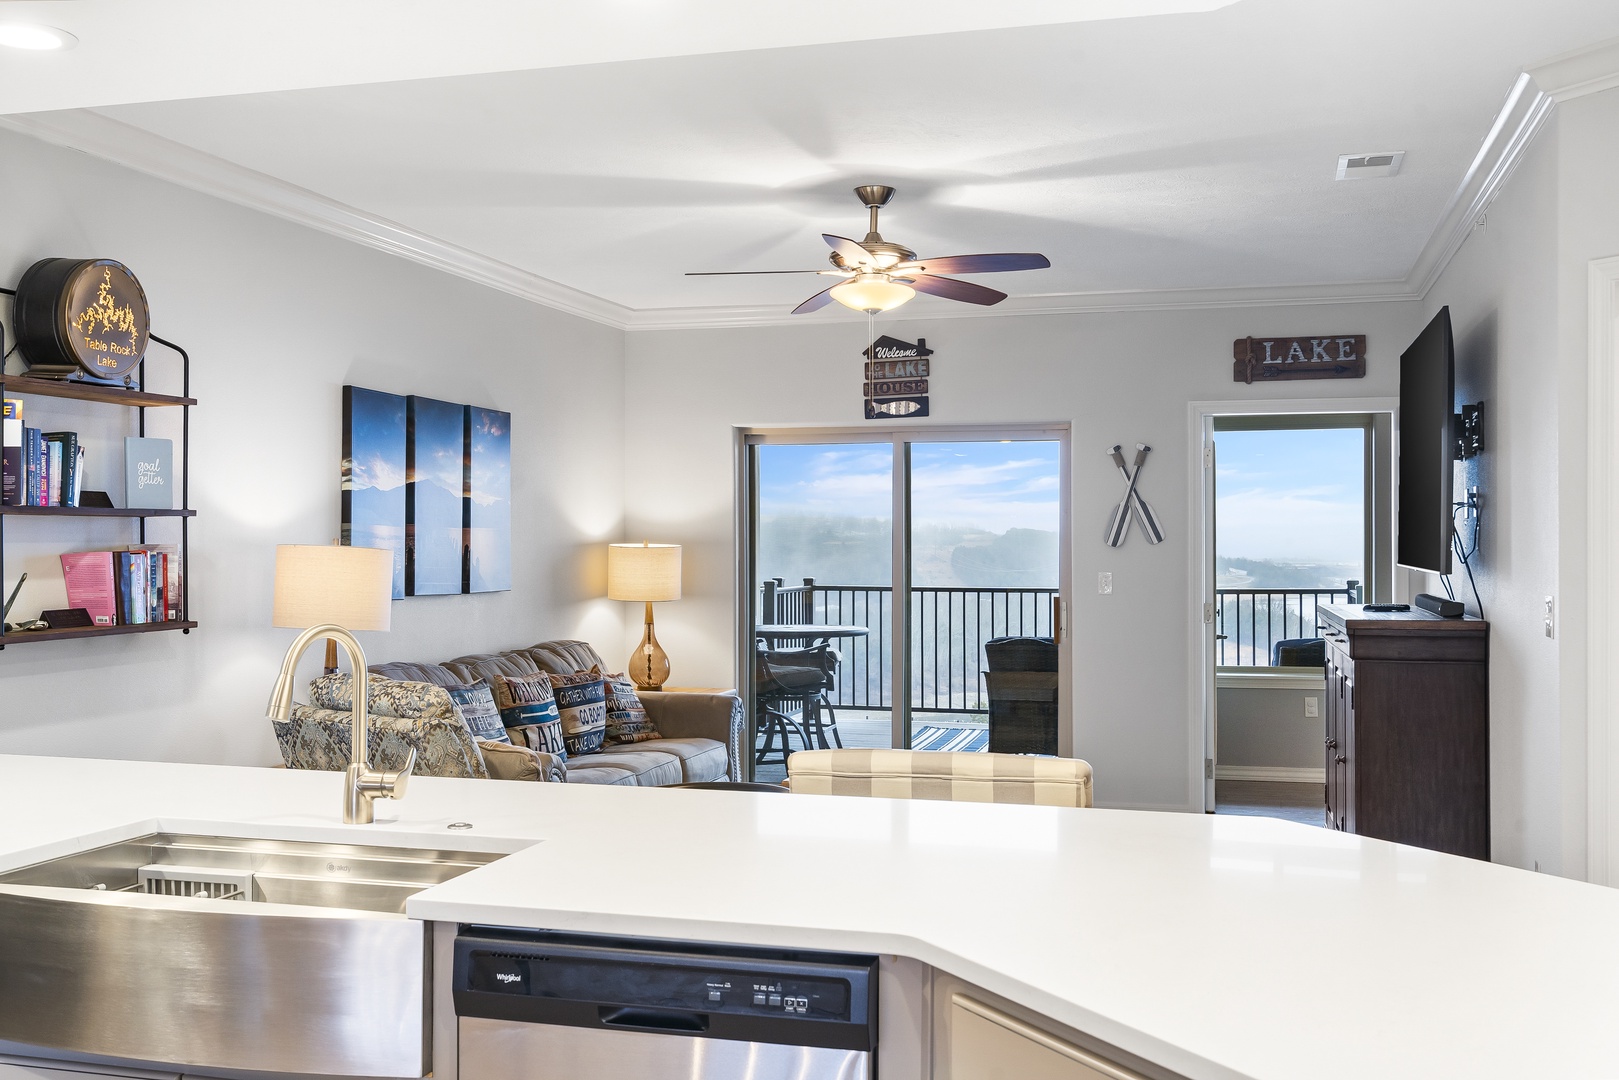 The airy kitchen features beautiful views, ample space, & all the comforts of home